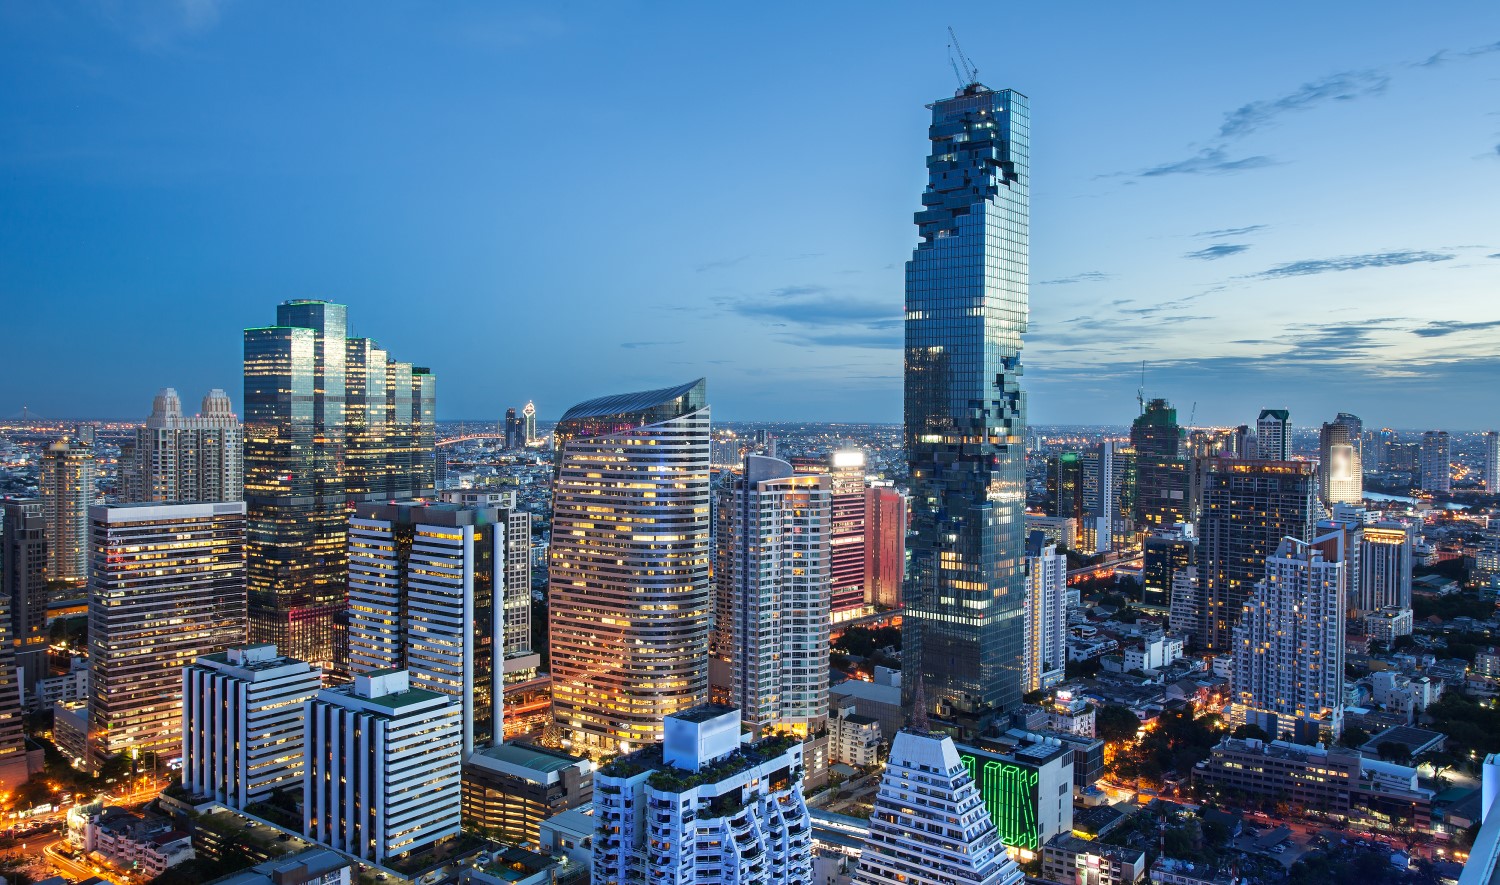 Thailand To Bring Cryptocurrency Under Anti-Money Laundering Rules